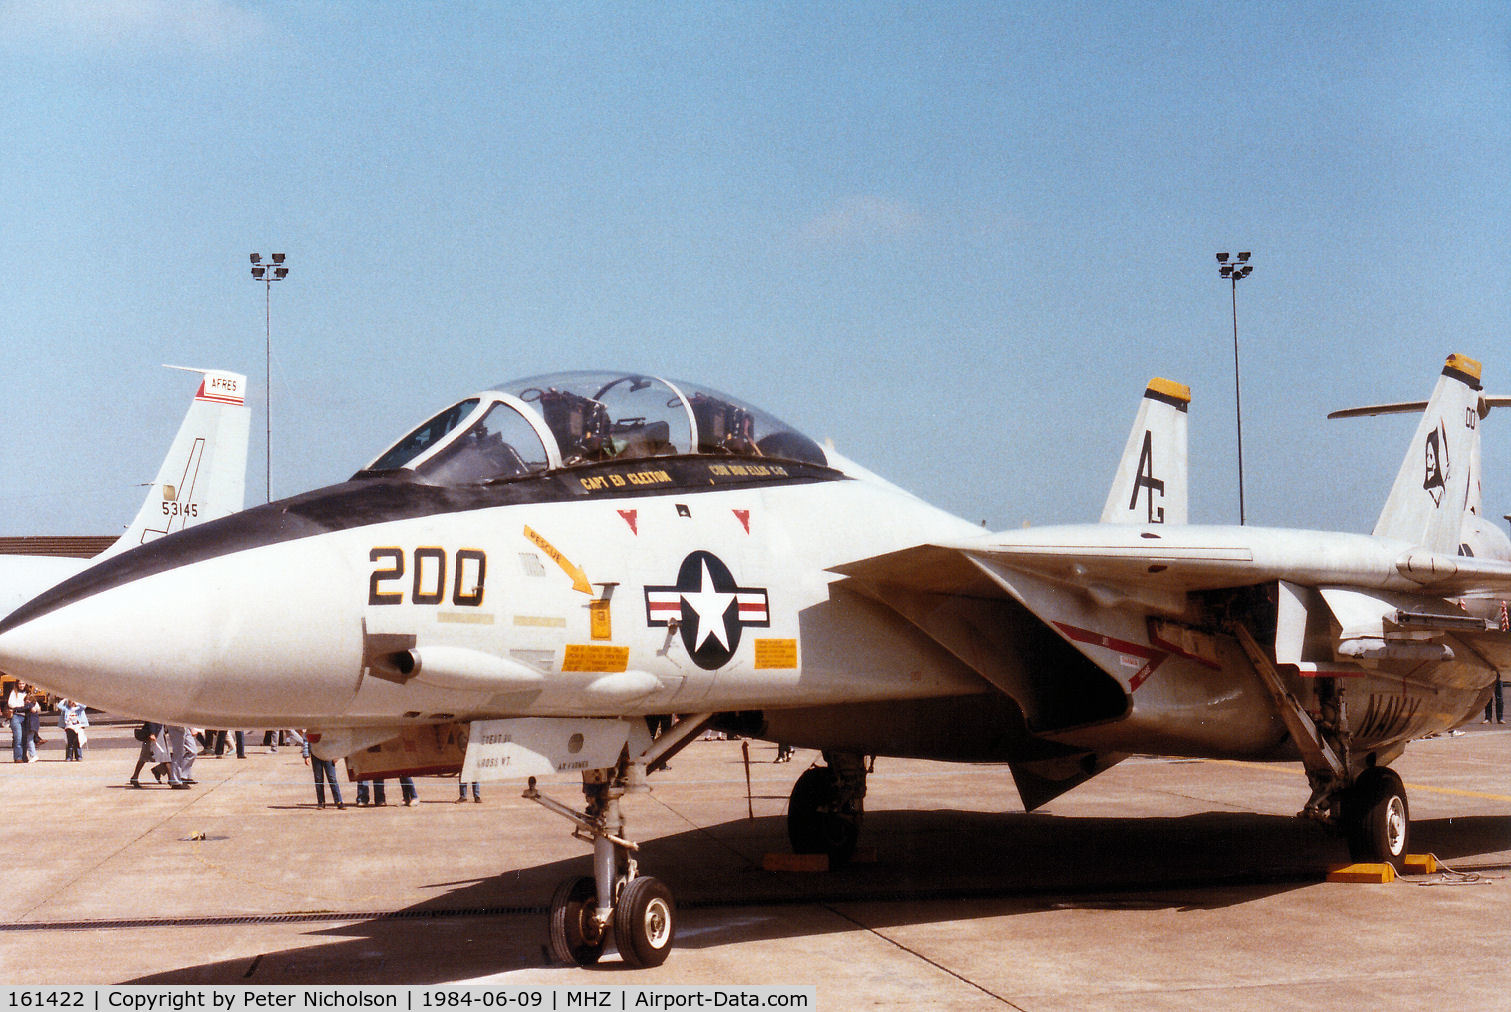 161422, Grumman F-14A Tomcat C/N 432, F-14A Tomcat of Fighter Squadron VF-142 aboard the USS Dwight D Eisenhower on display at the 1984 RAF Mildenhall Air Fete.